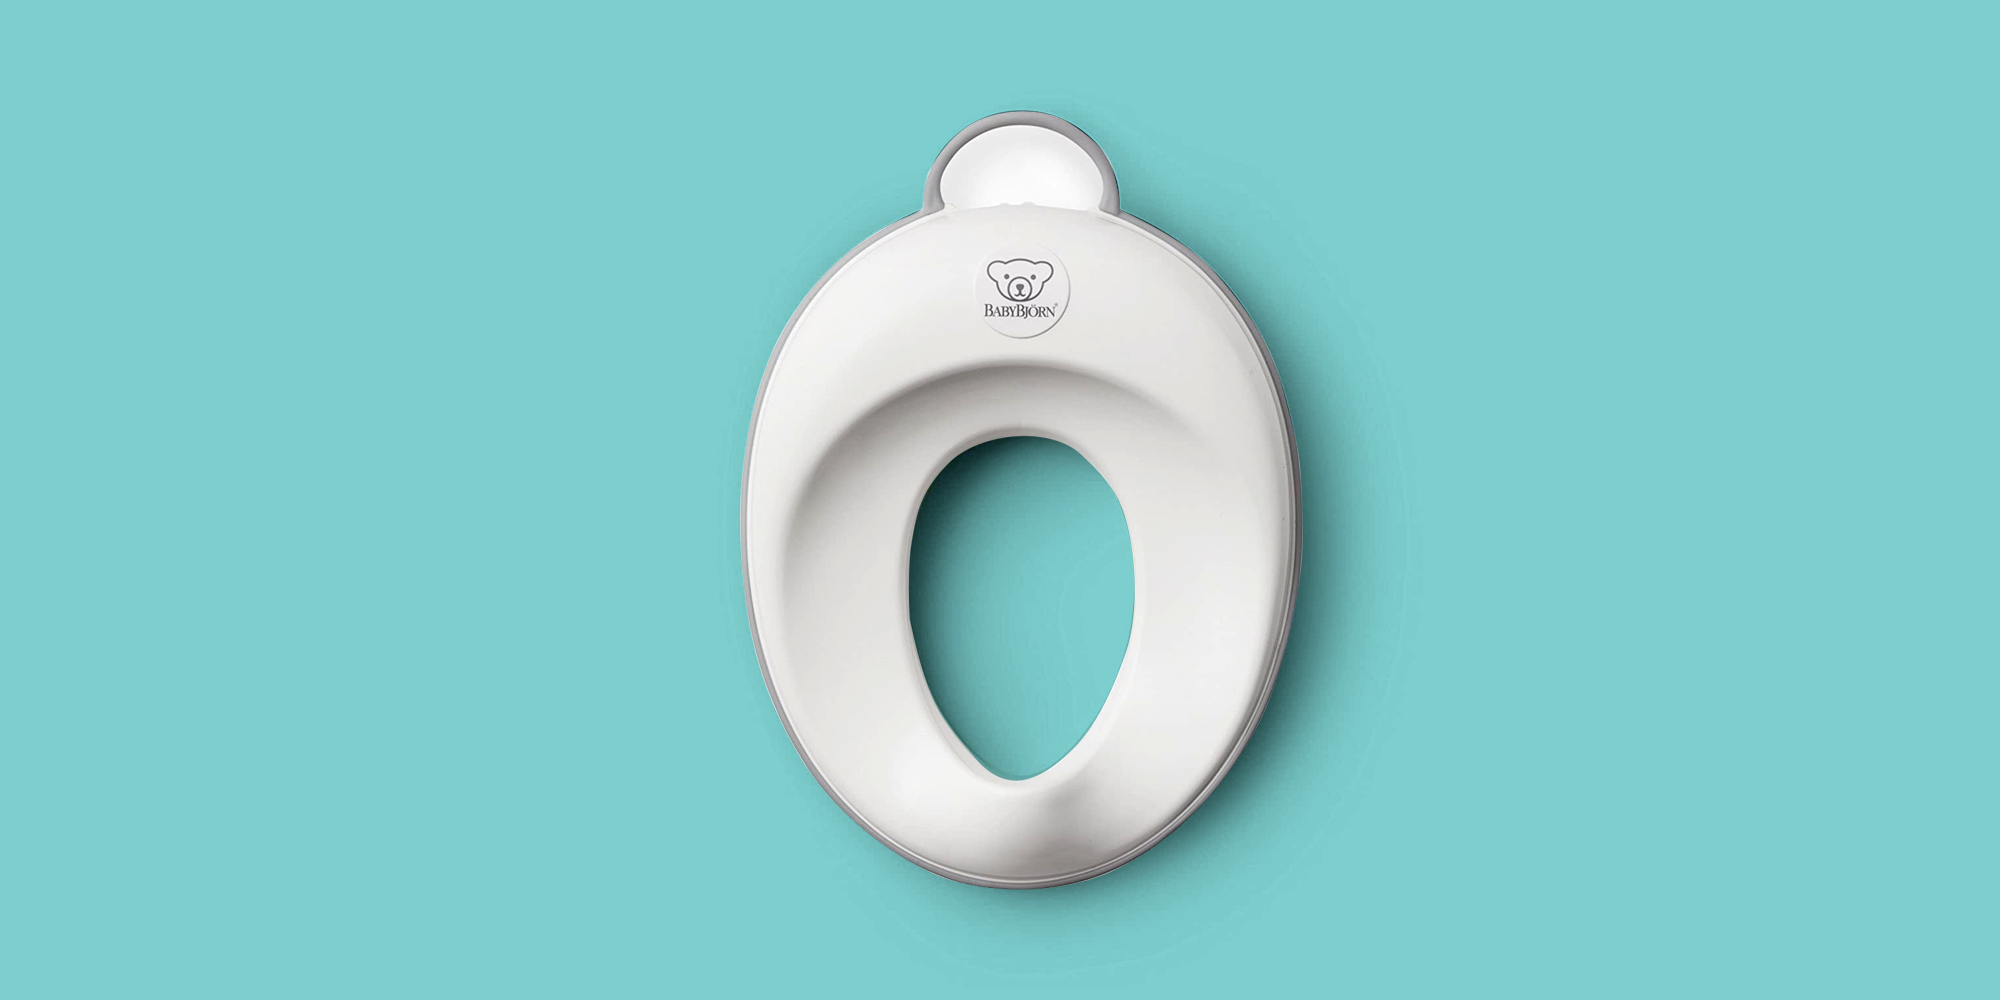 AiKiddo Toilet Seat Potty Toilet Seat for Toddler Potty Training Seats with Soft 